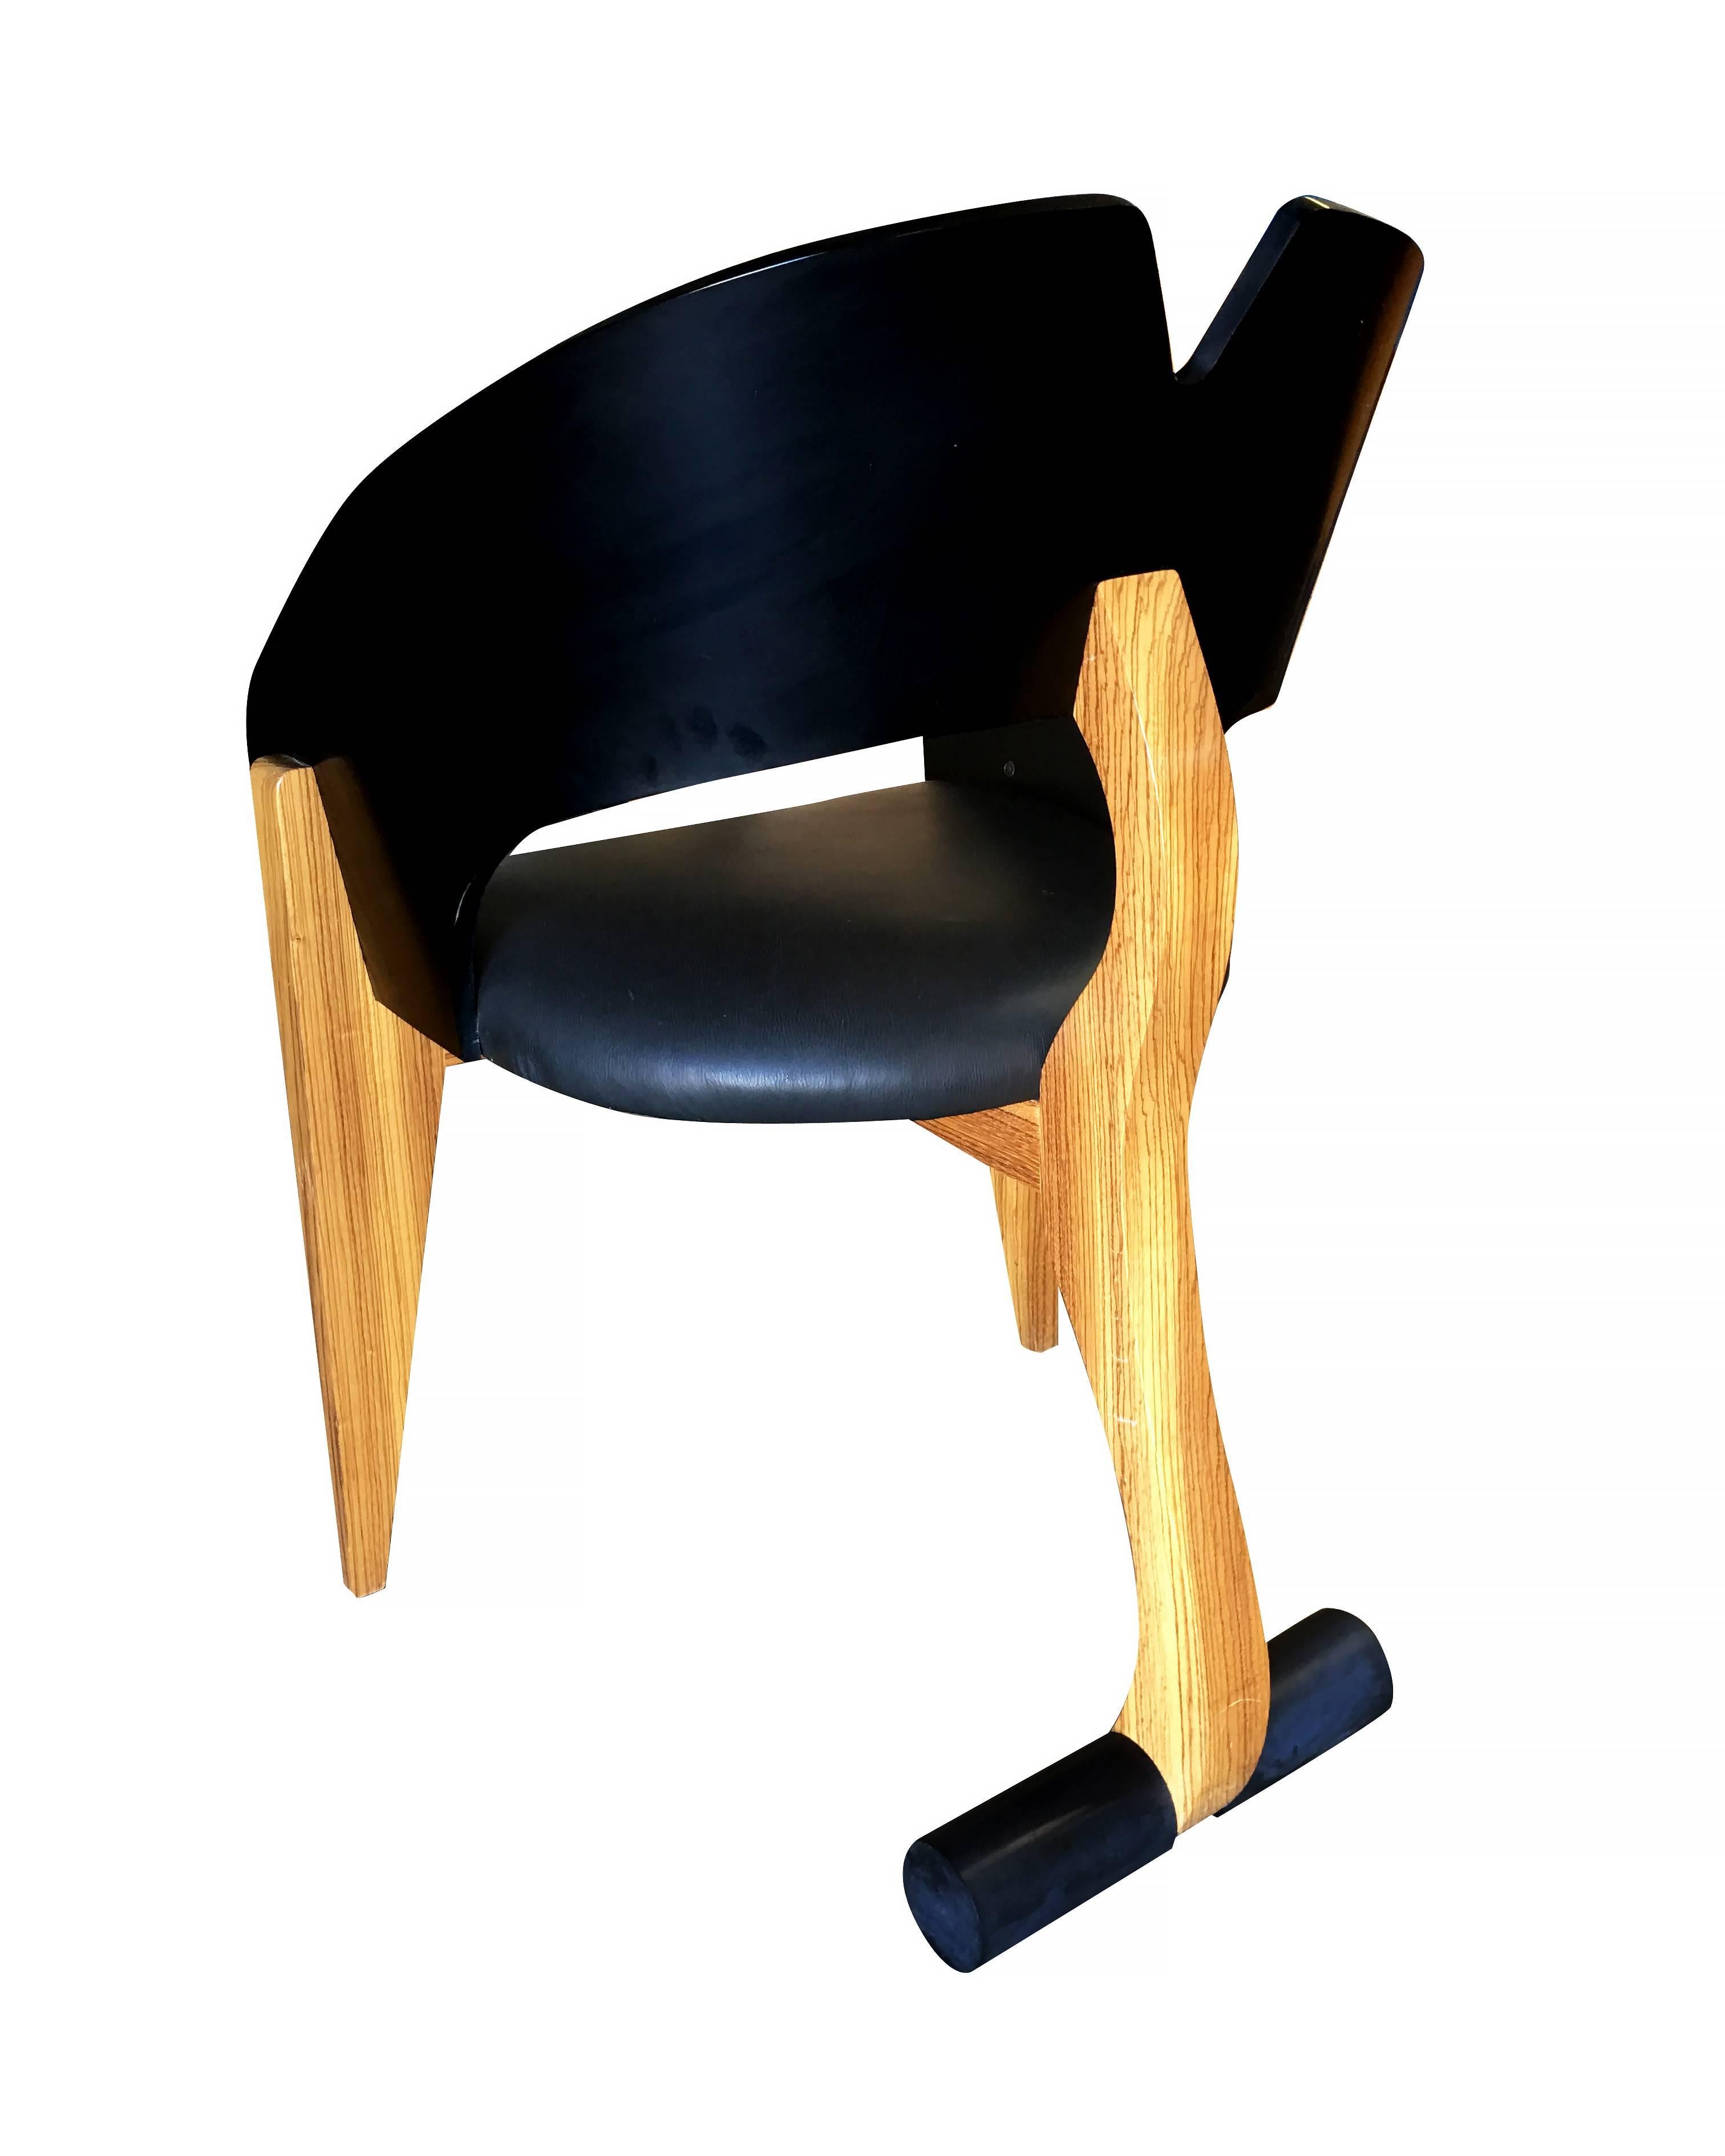 Leather Modernist Chair from the Gallery of Functional Art, circa 1994